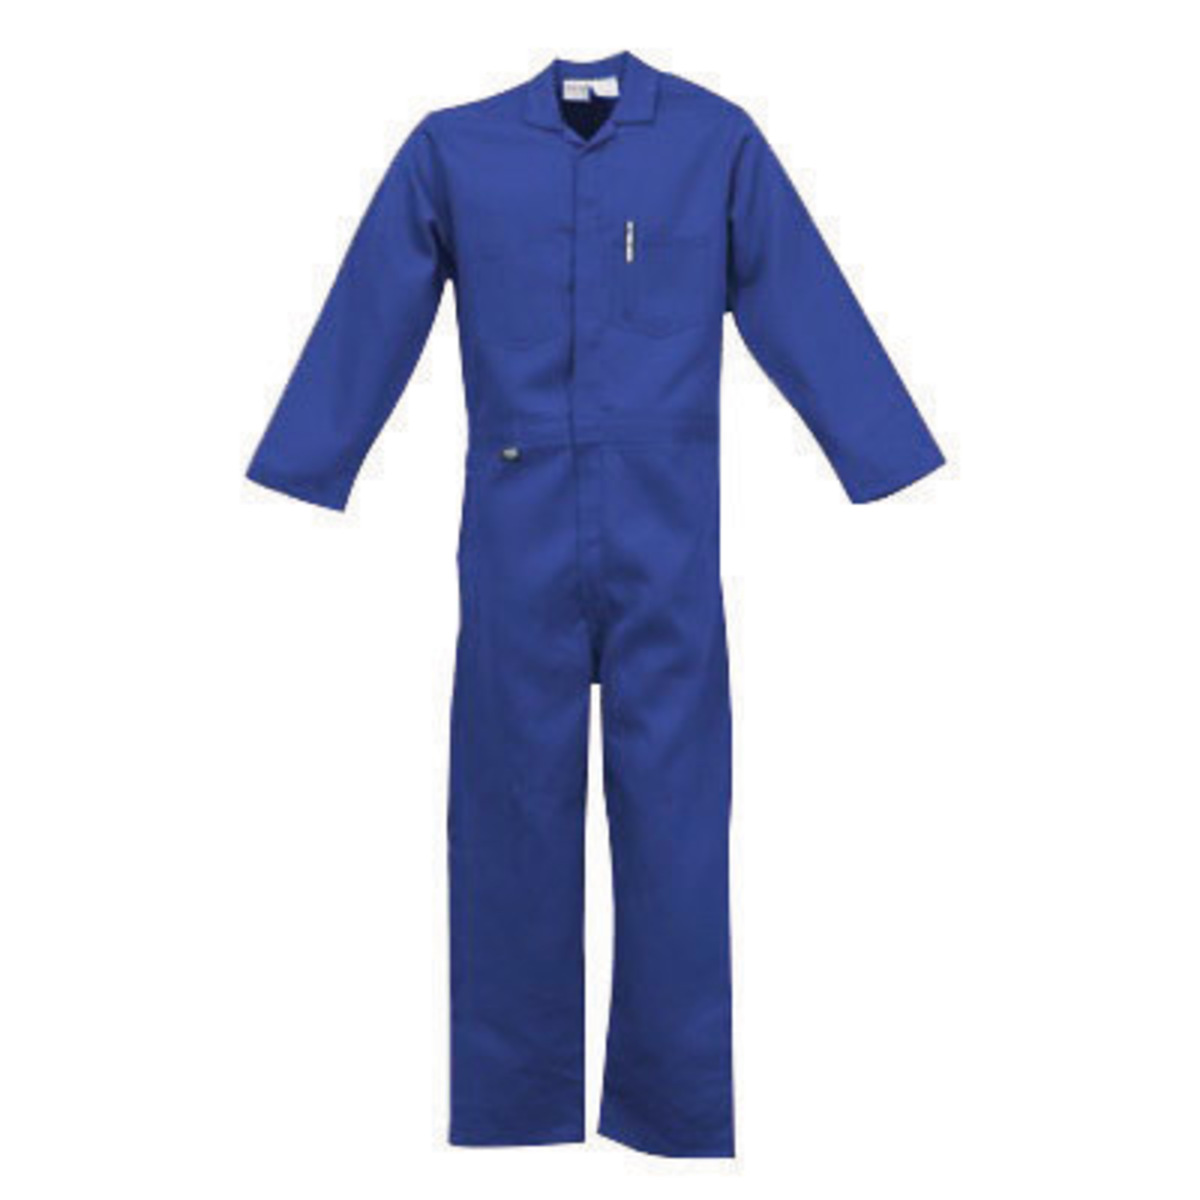 Stanco Safety Products™ 5X Tall Navy Blue Nomex® IIIA Arc Rated Flame Resistant Coveralls With Front Zipper Closure And 1 (4.8 c